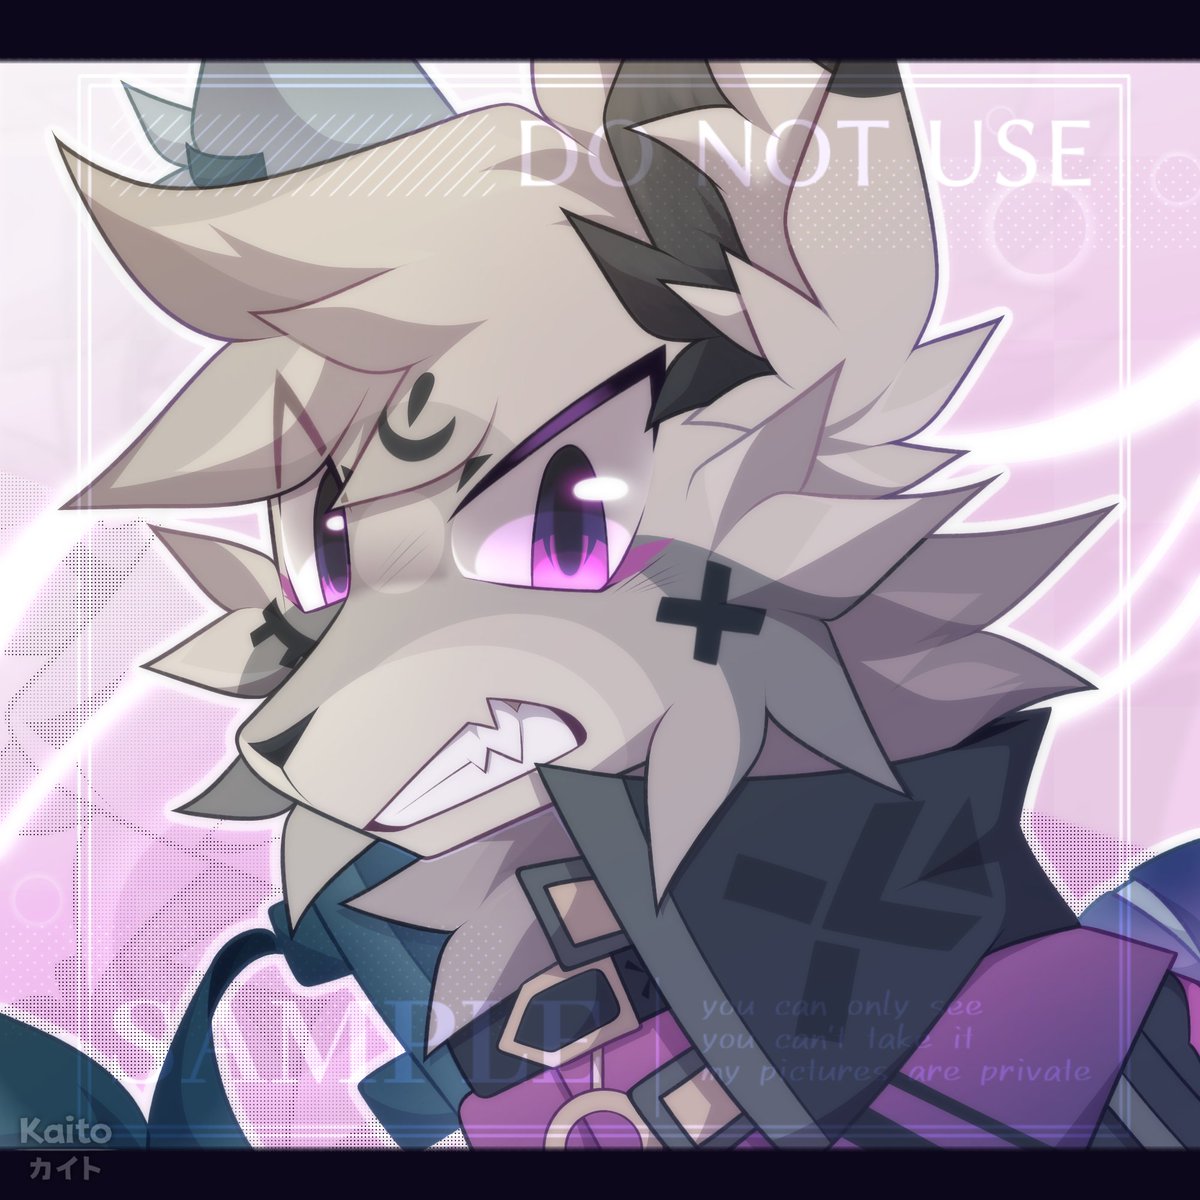 The last detail icon commission for @/terenry.
I will stop drawing this type of icon for a long time to have more time to take care of my life. I will reopen this type of commission icon soon, but I don't promise when it will open.
#art #furryart #furrrycommunity #digitalartists